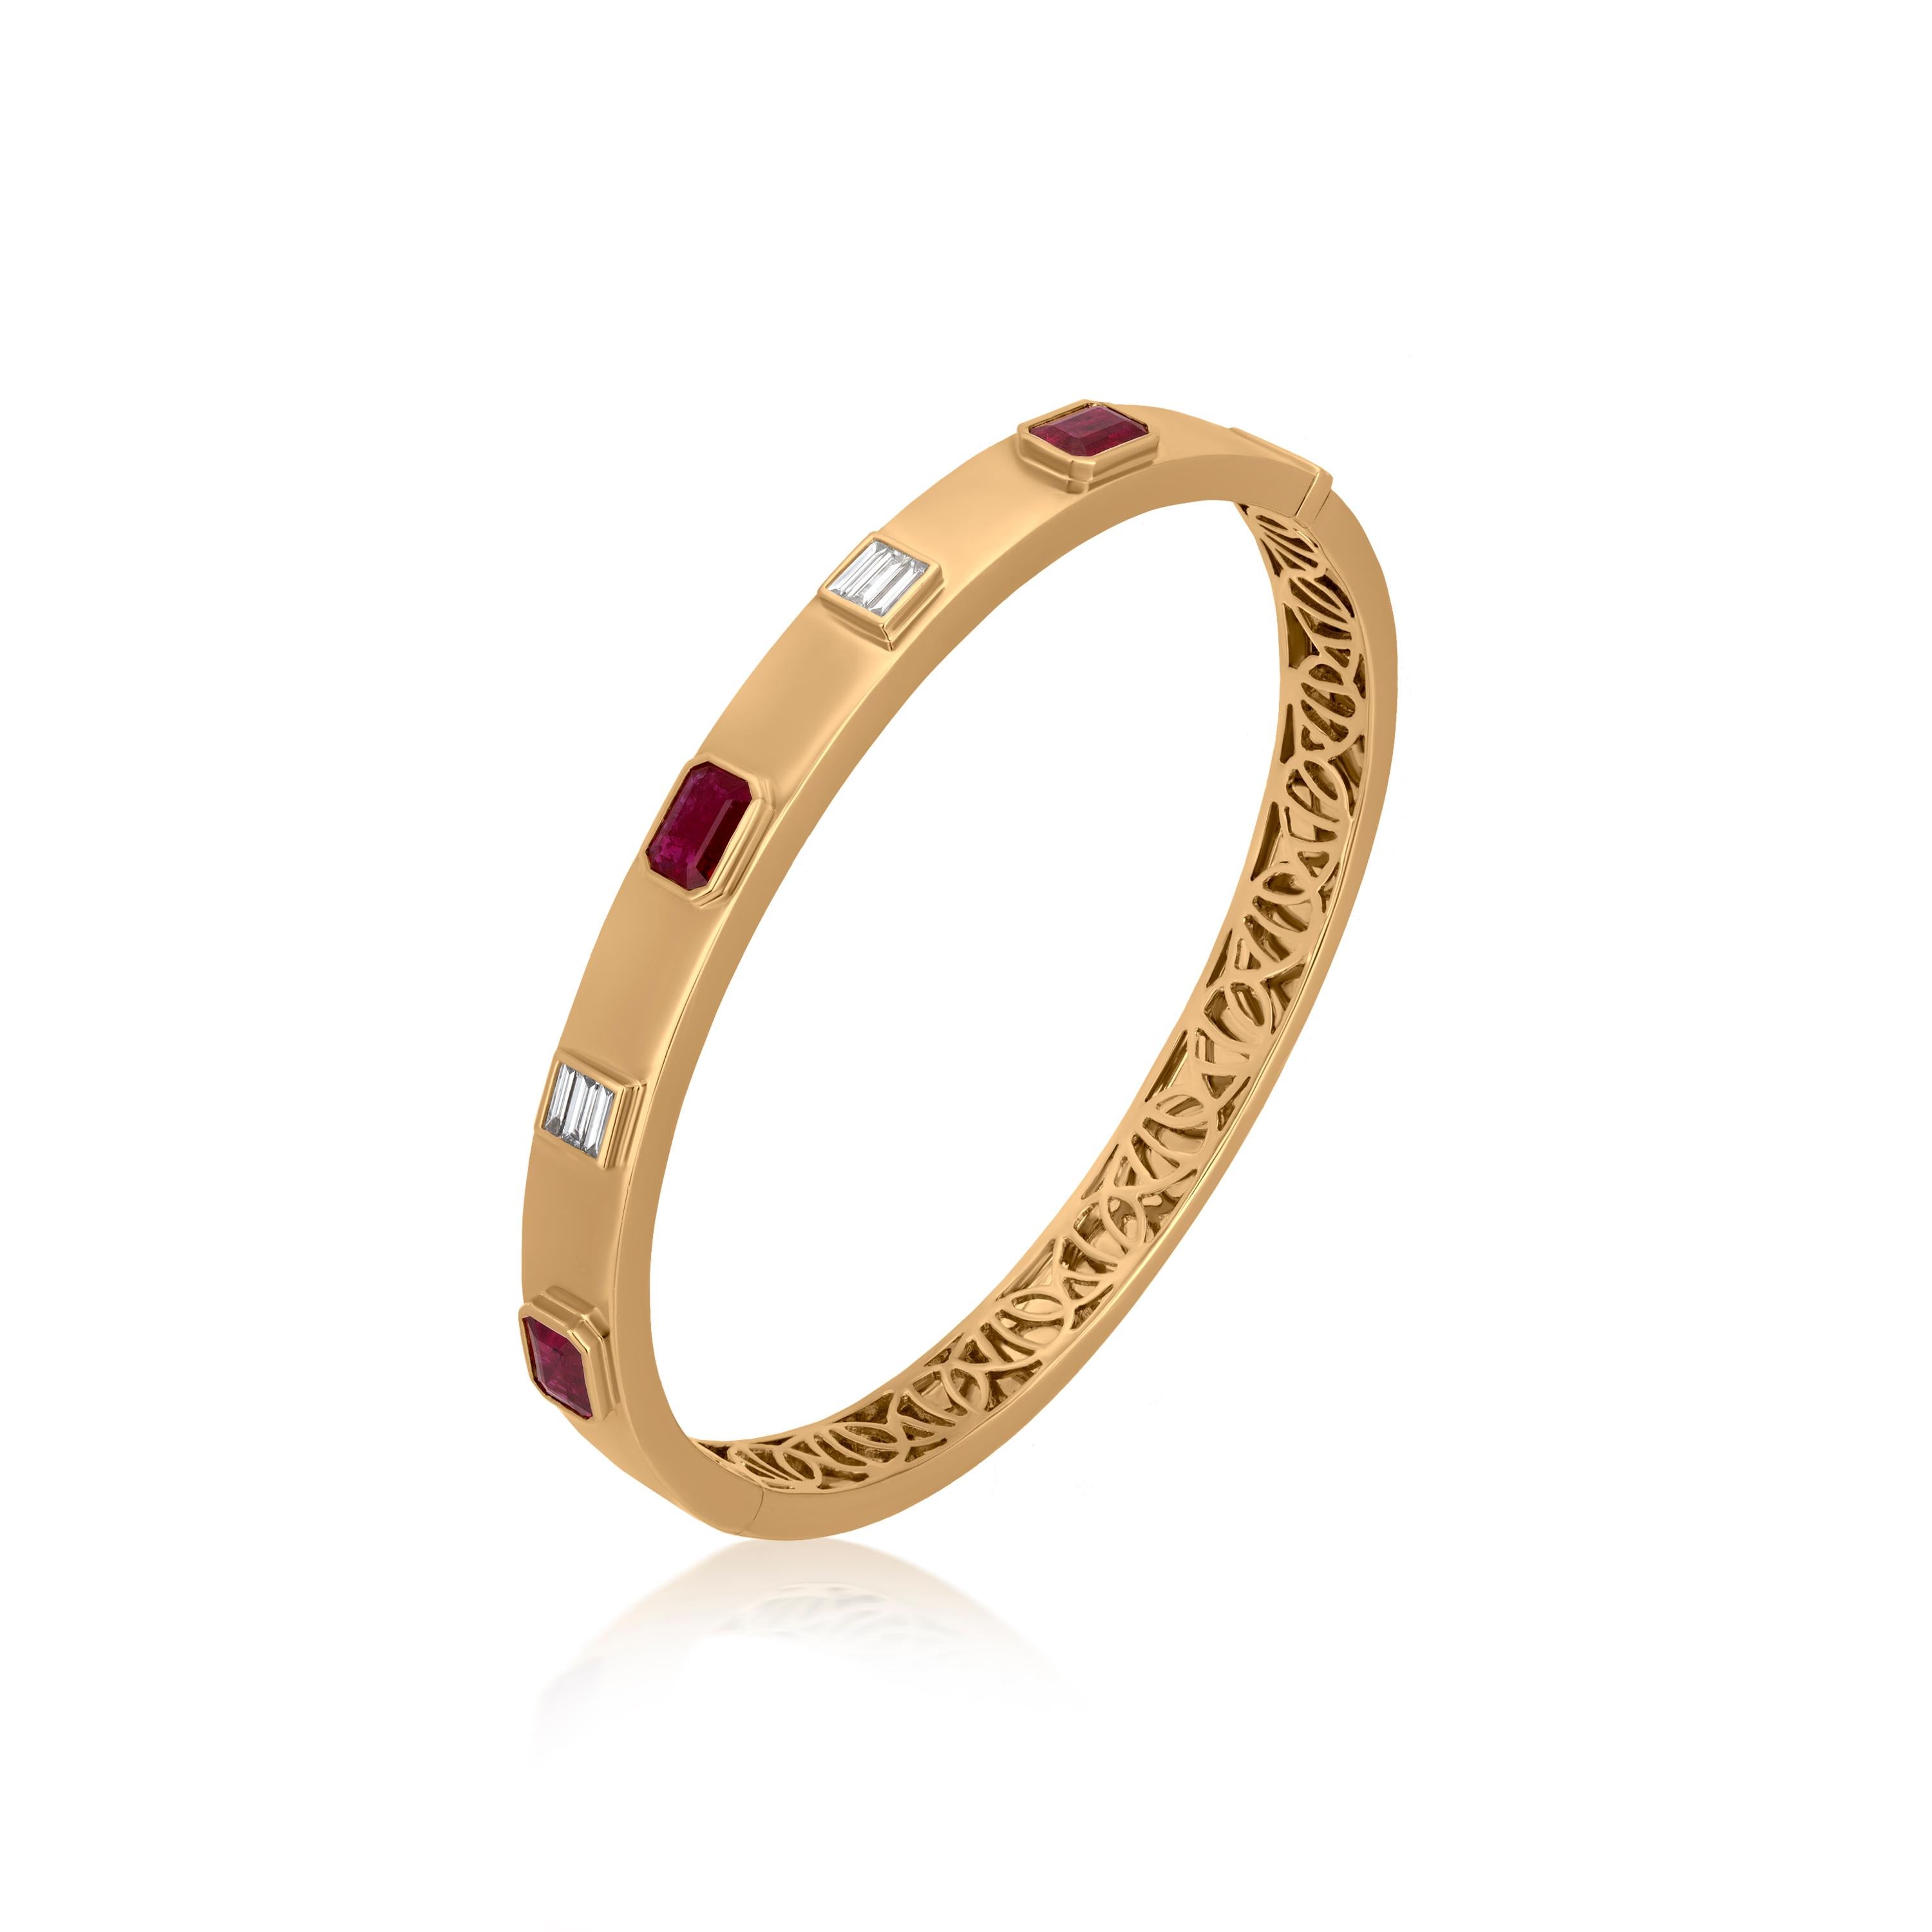 Adorn yourself with this spectacular bangle bracelet. 1.83 ct. t.w. octagon bezel set rubies alternate with .25 ct. t.w. baguette full-cut diamonds on polished 18k yellow gold. The inner back of the bangle bracelet is further accentuated by a